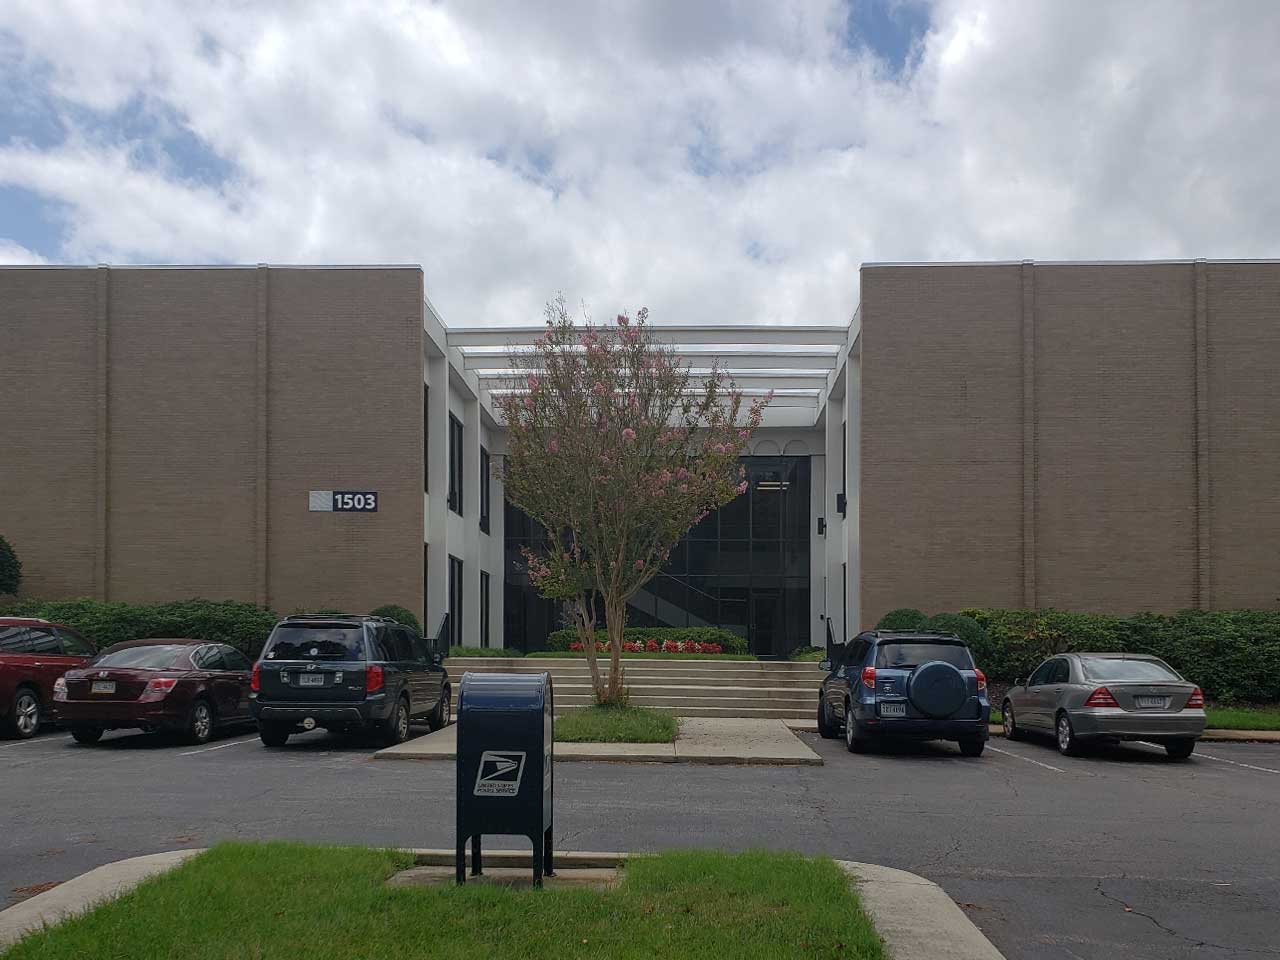 Location of Virginia office within modern brick building with no fenestration on the facade.